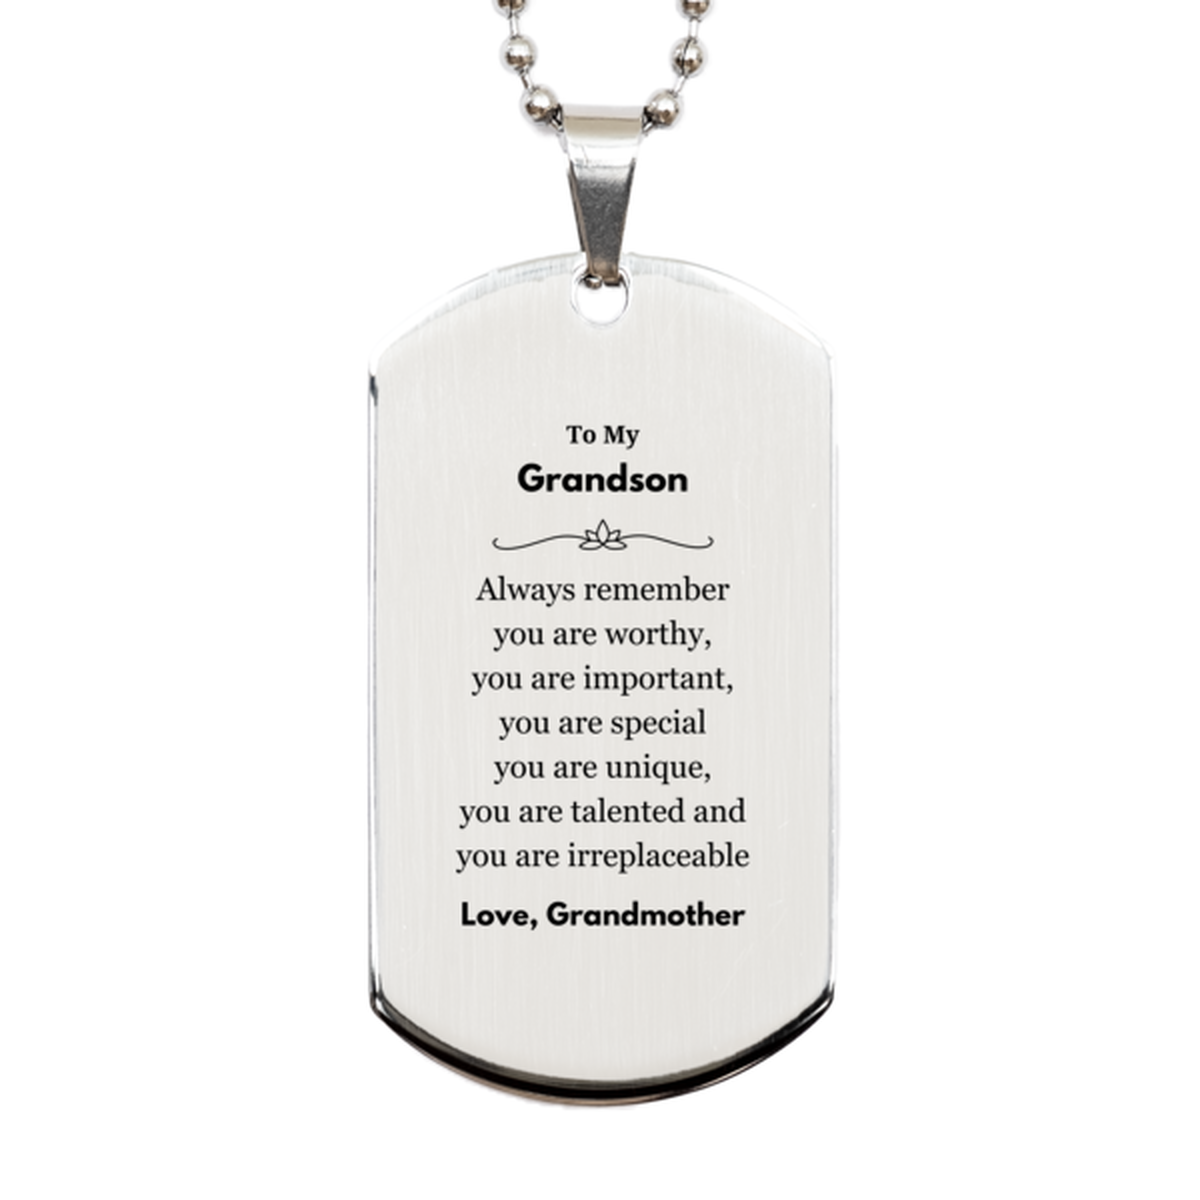 Grandson Birthday Gifts from Grandmother, Inspirational Silver Dog Tag for Grandson Christmas Graduation Gifts for Grandson Always remember you are worthy, you are important. Love, Grandmother